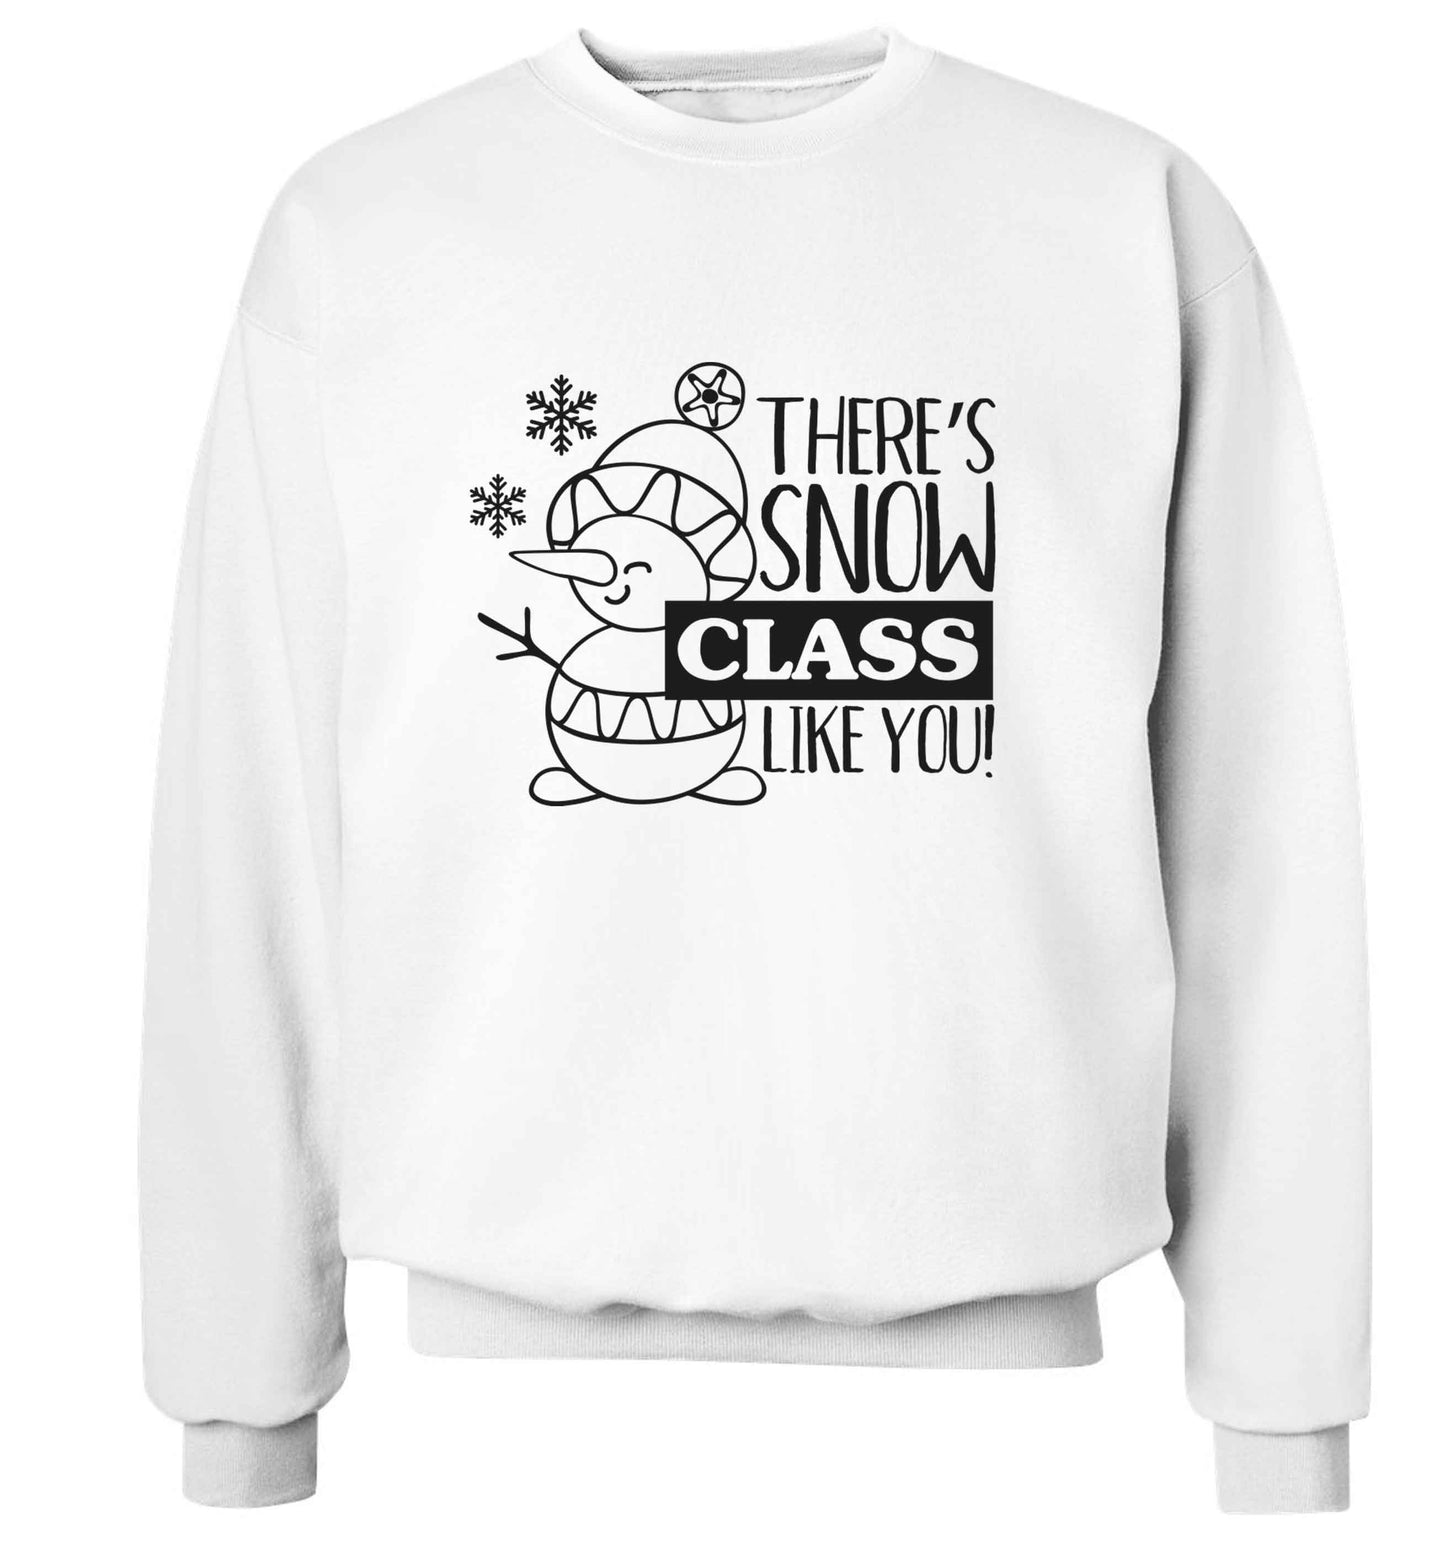 There's snow class like you adult's unisex white sweater 2XL